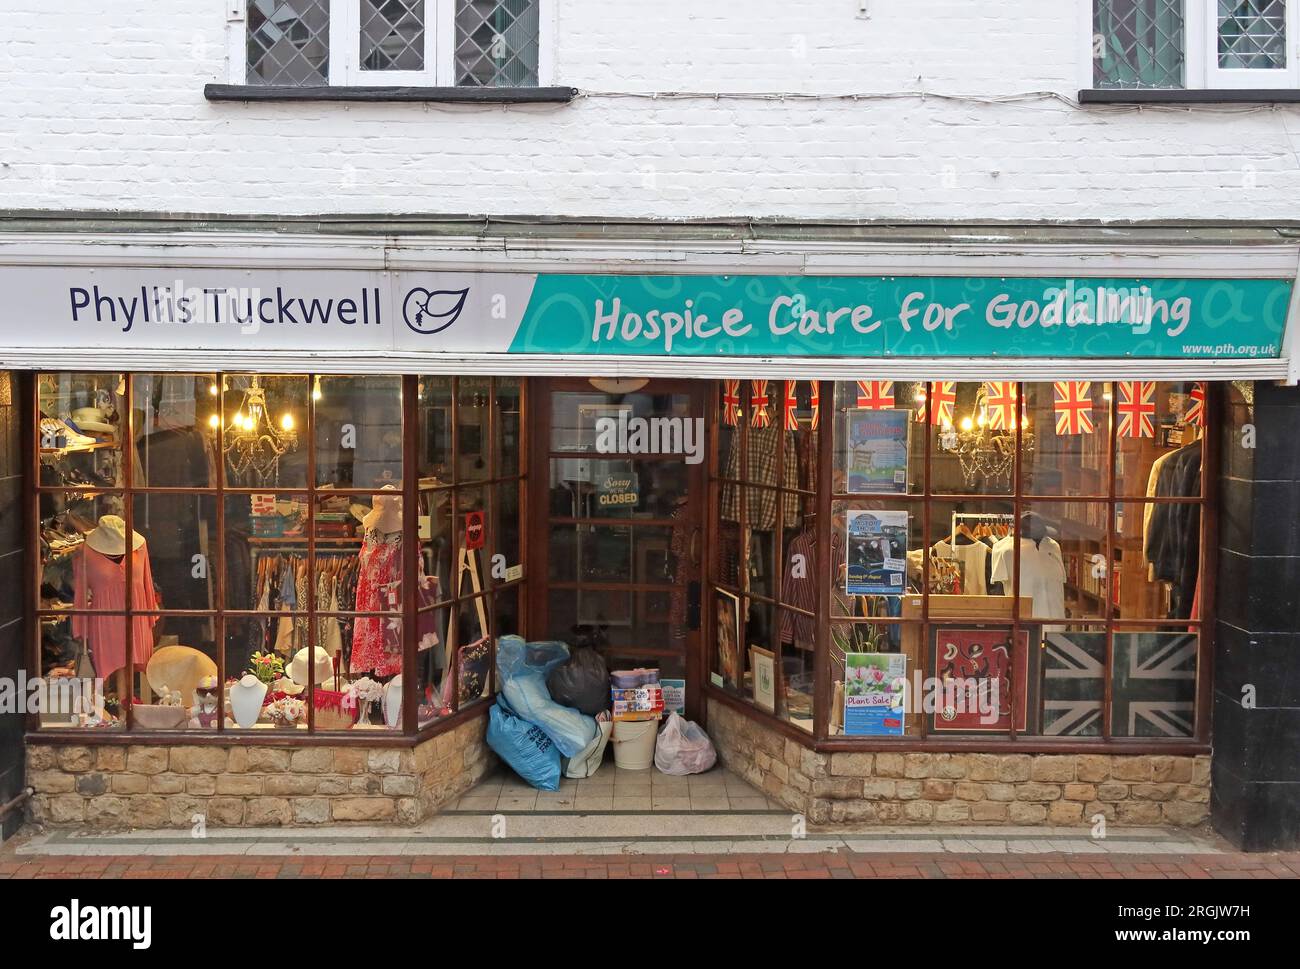 Phyllis Tuckwell Charity shop, Hospice Care for Godalming, 114 High St, Godalming, Surrey, Angleterre, ROYAUME-UNI, GU7 1DW Banque D'Images